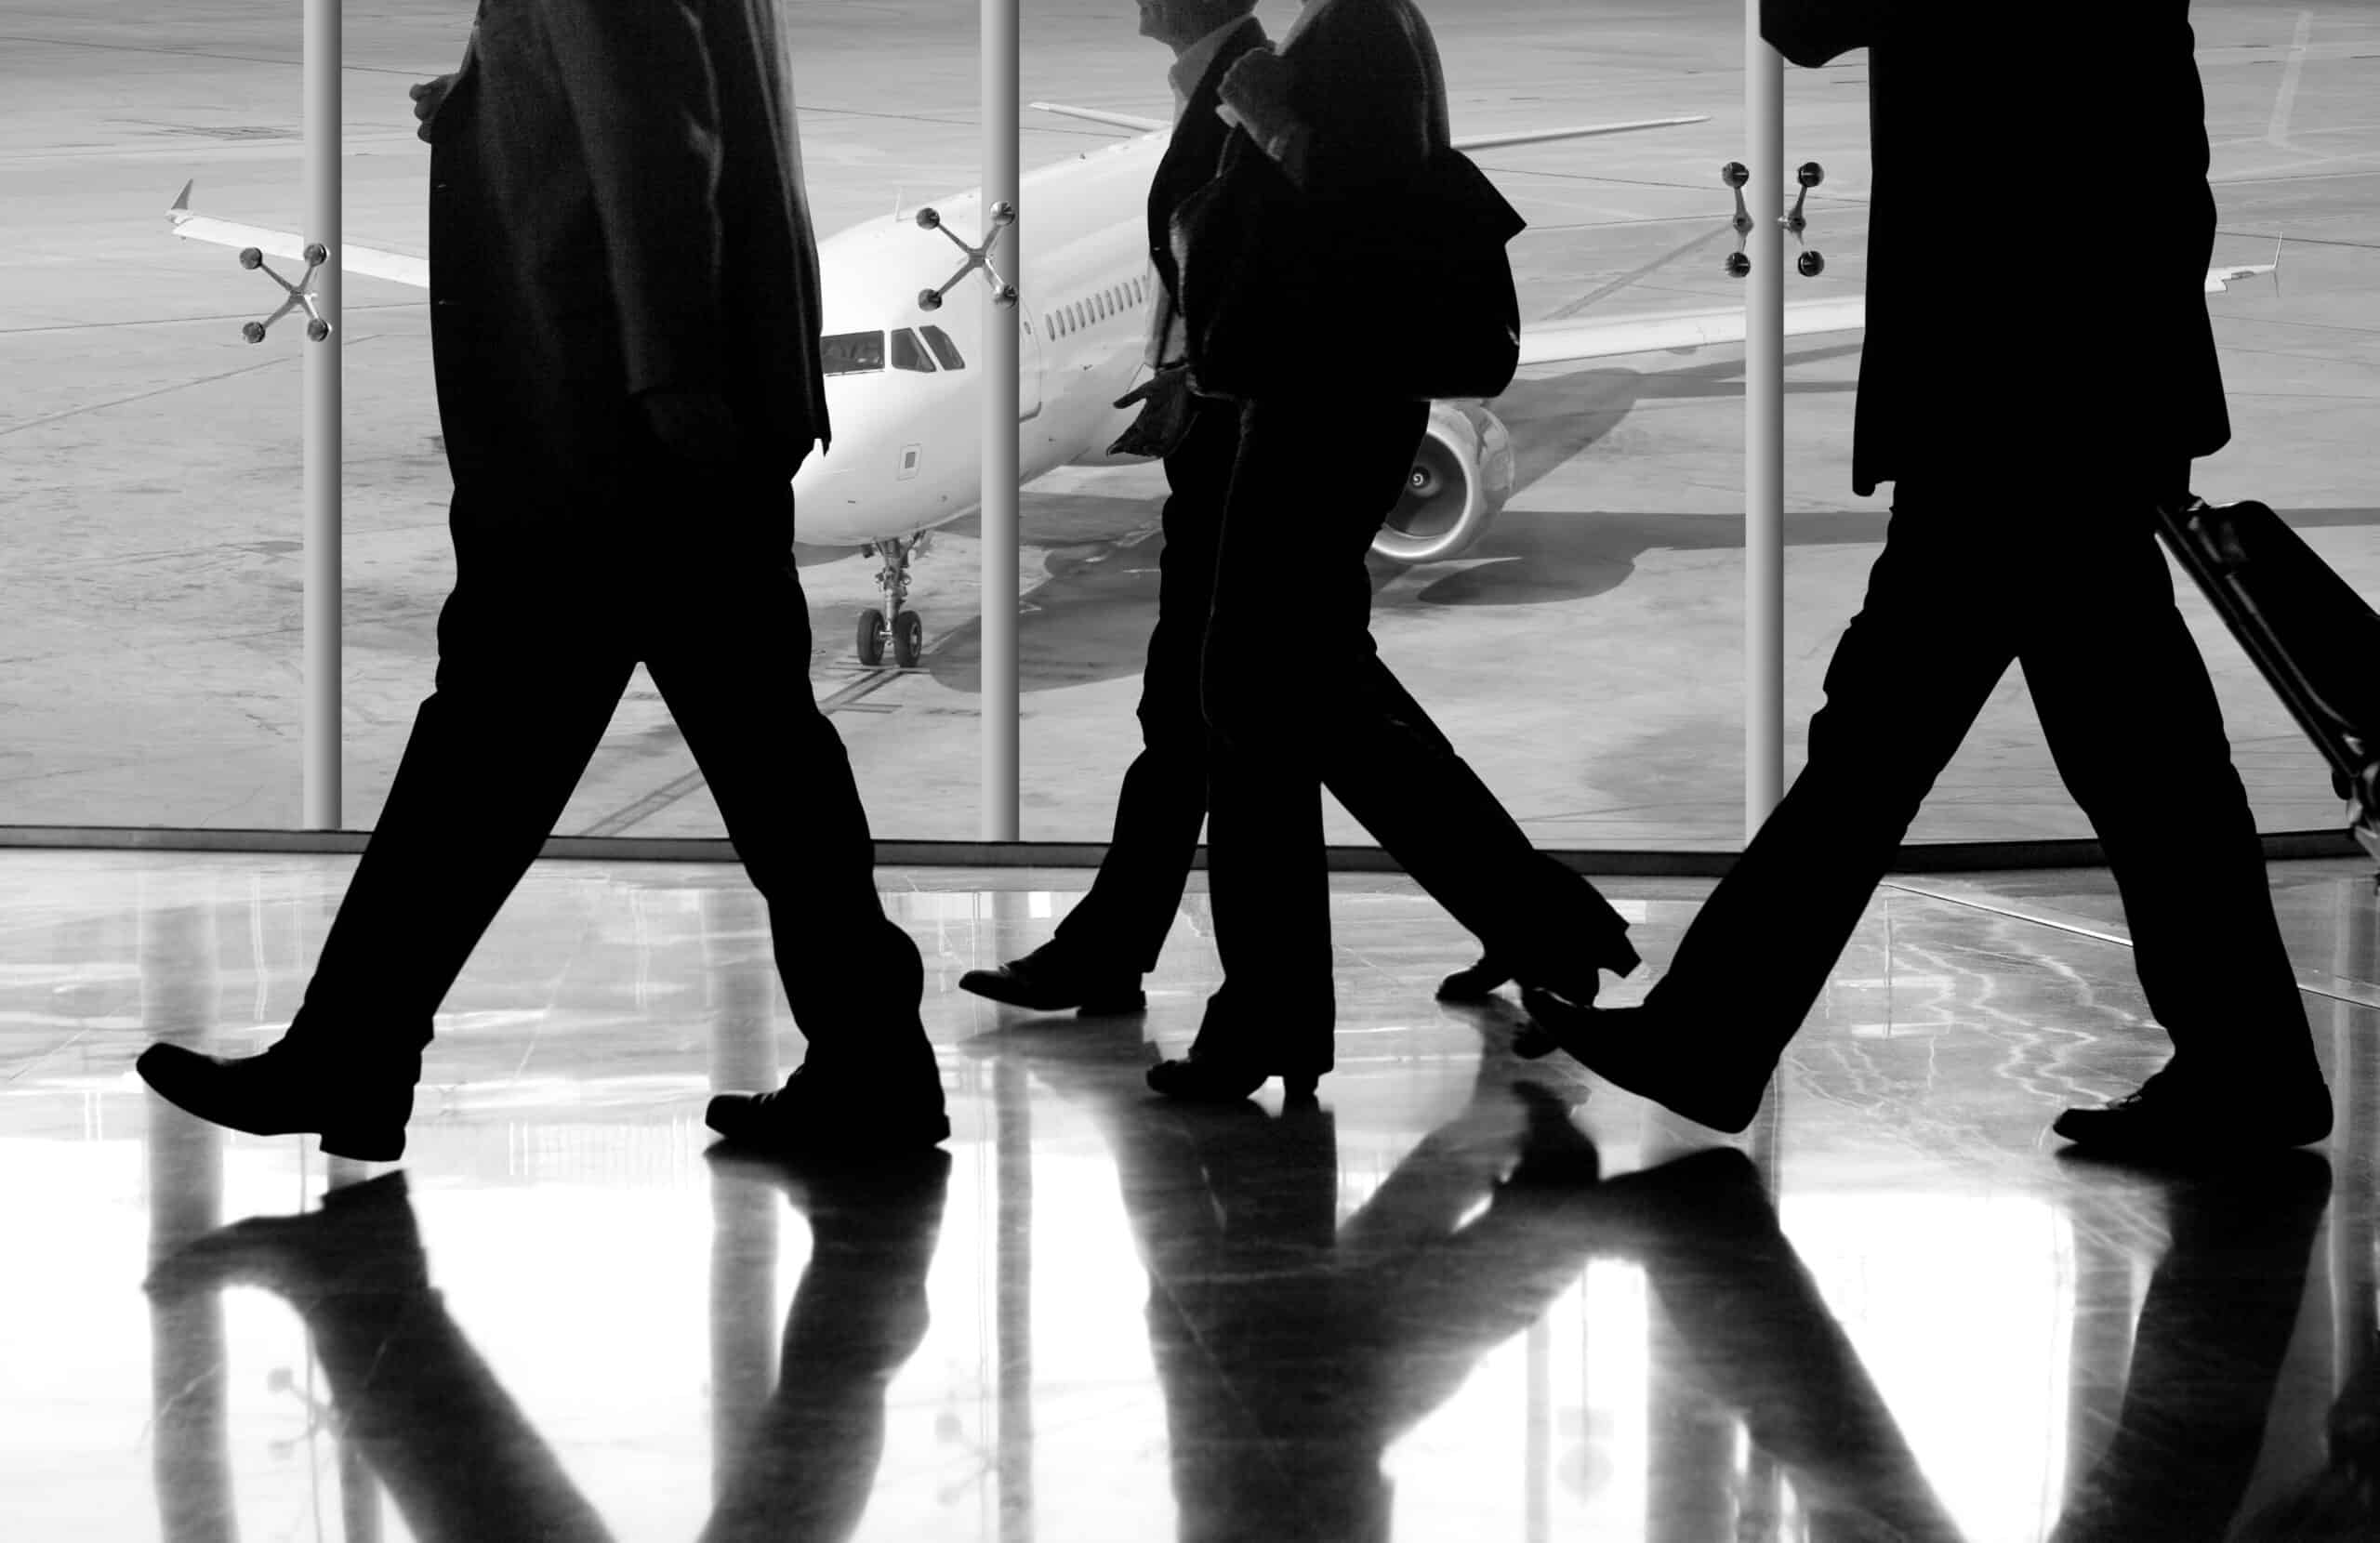 business travel tips